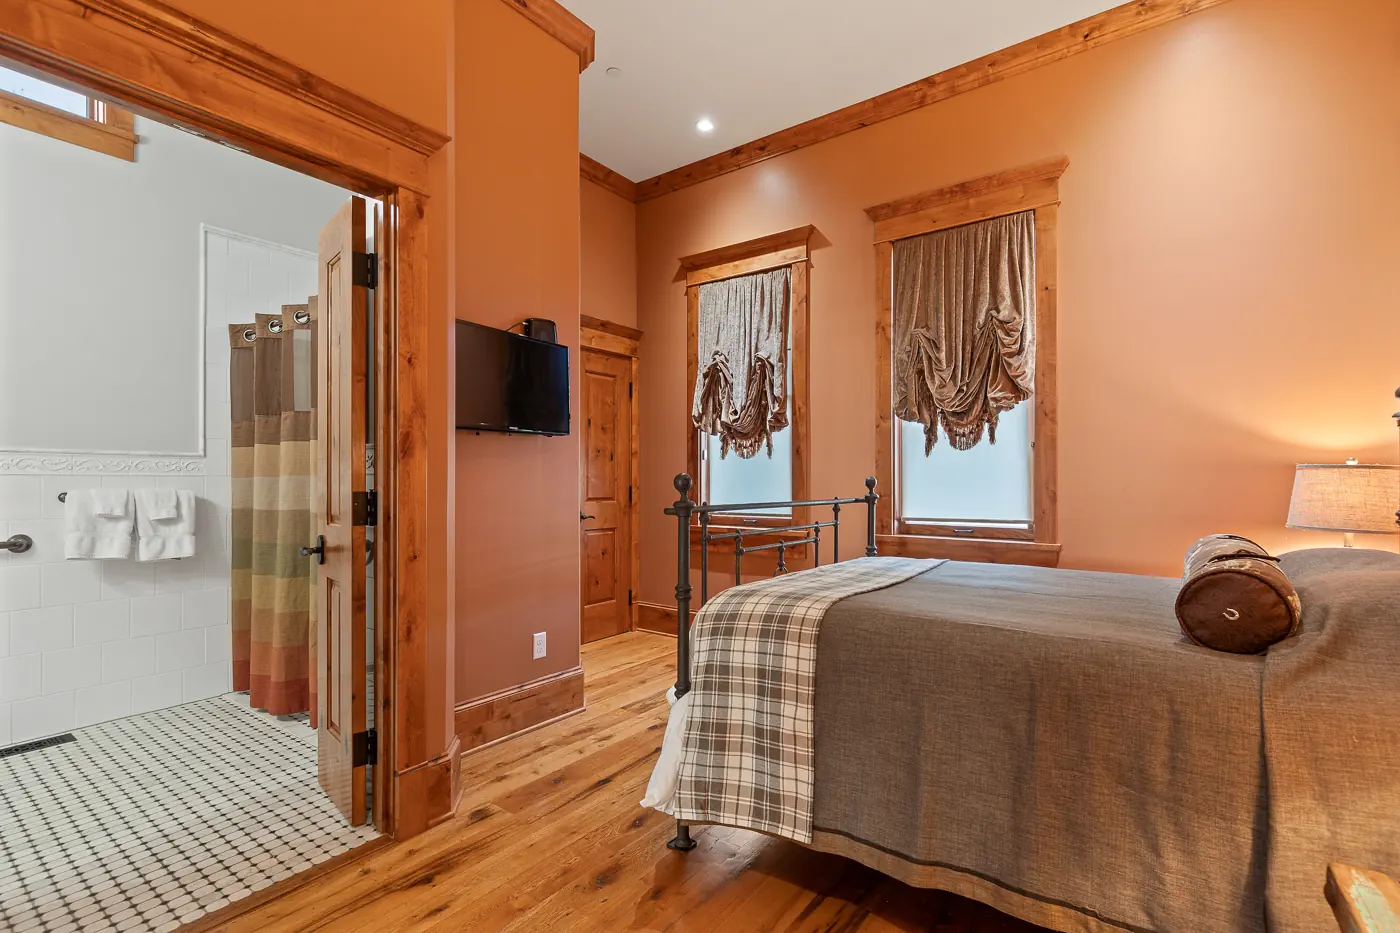 The Kleeman House bedroom with private bathroom